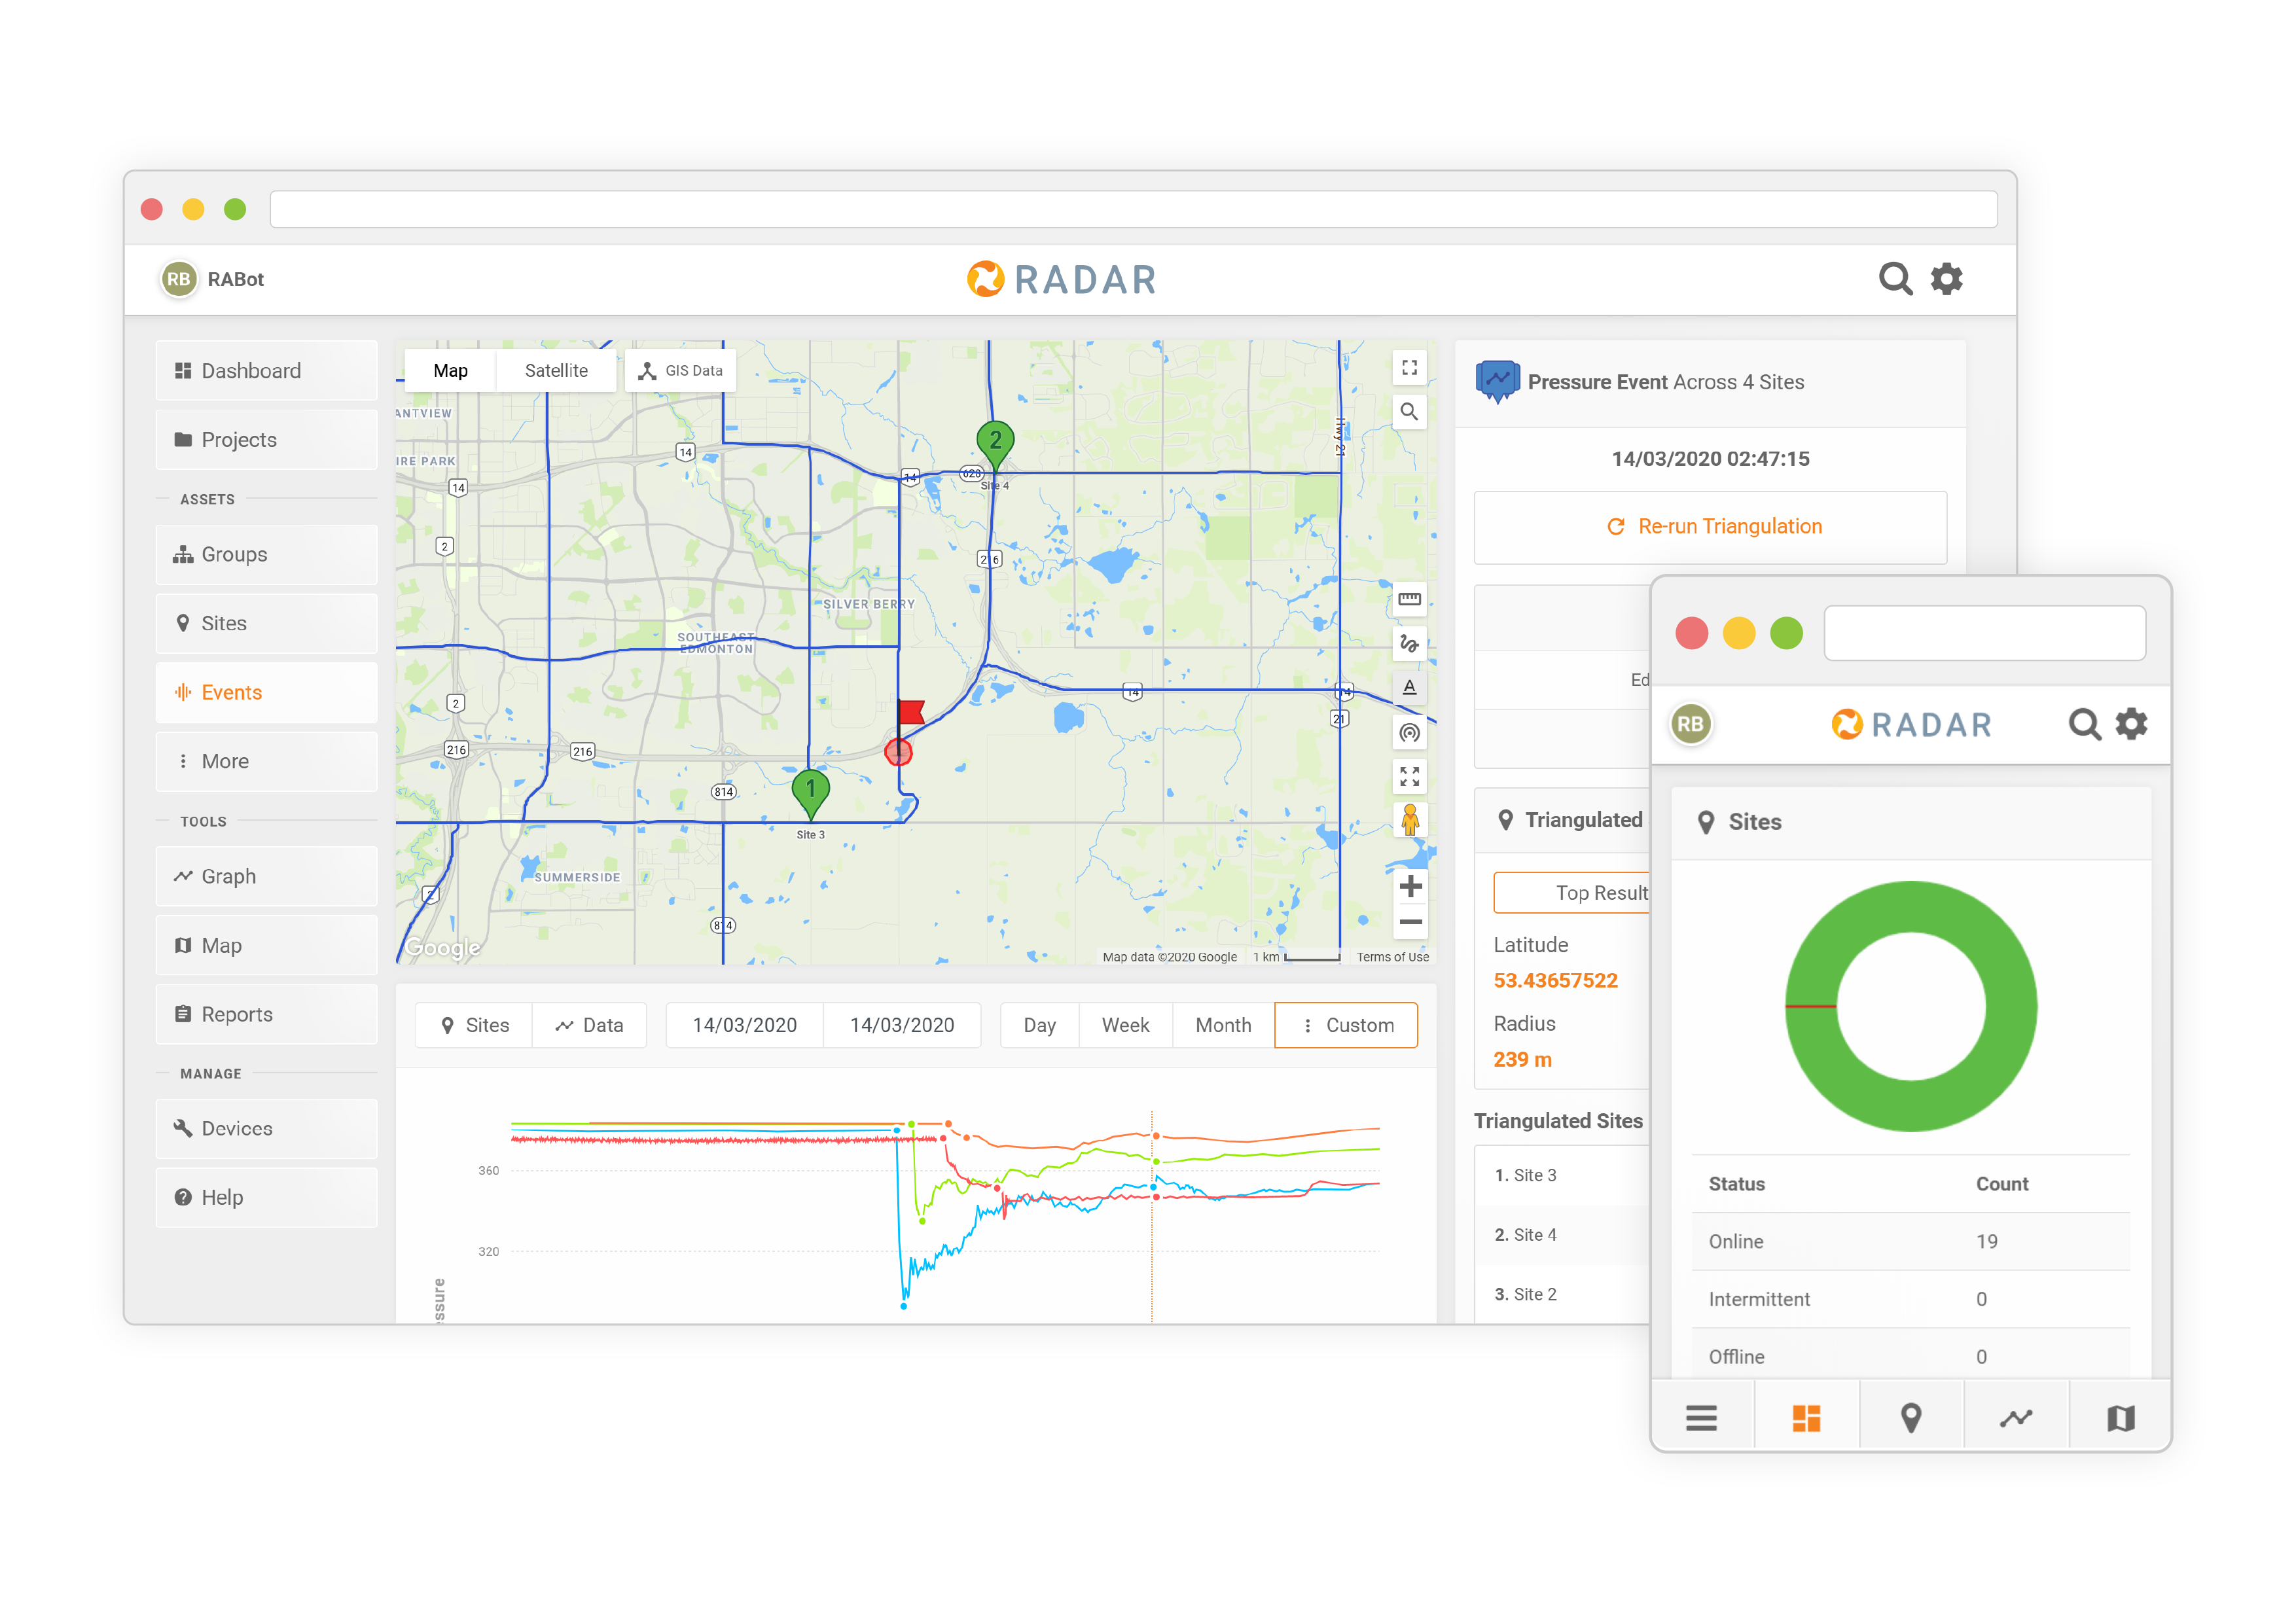 RADAR analyses data collected from Pipeminder monitoring devices and displays and notifies utilities in a format that is user customisable.